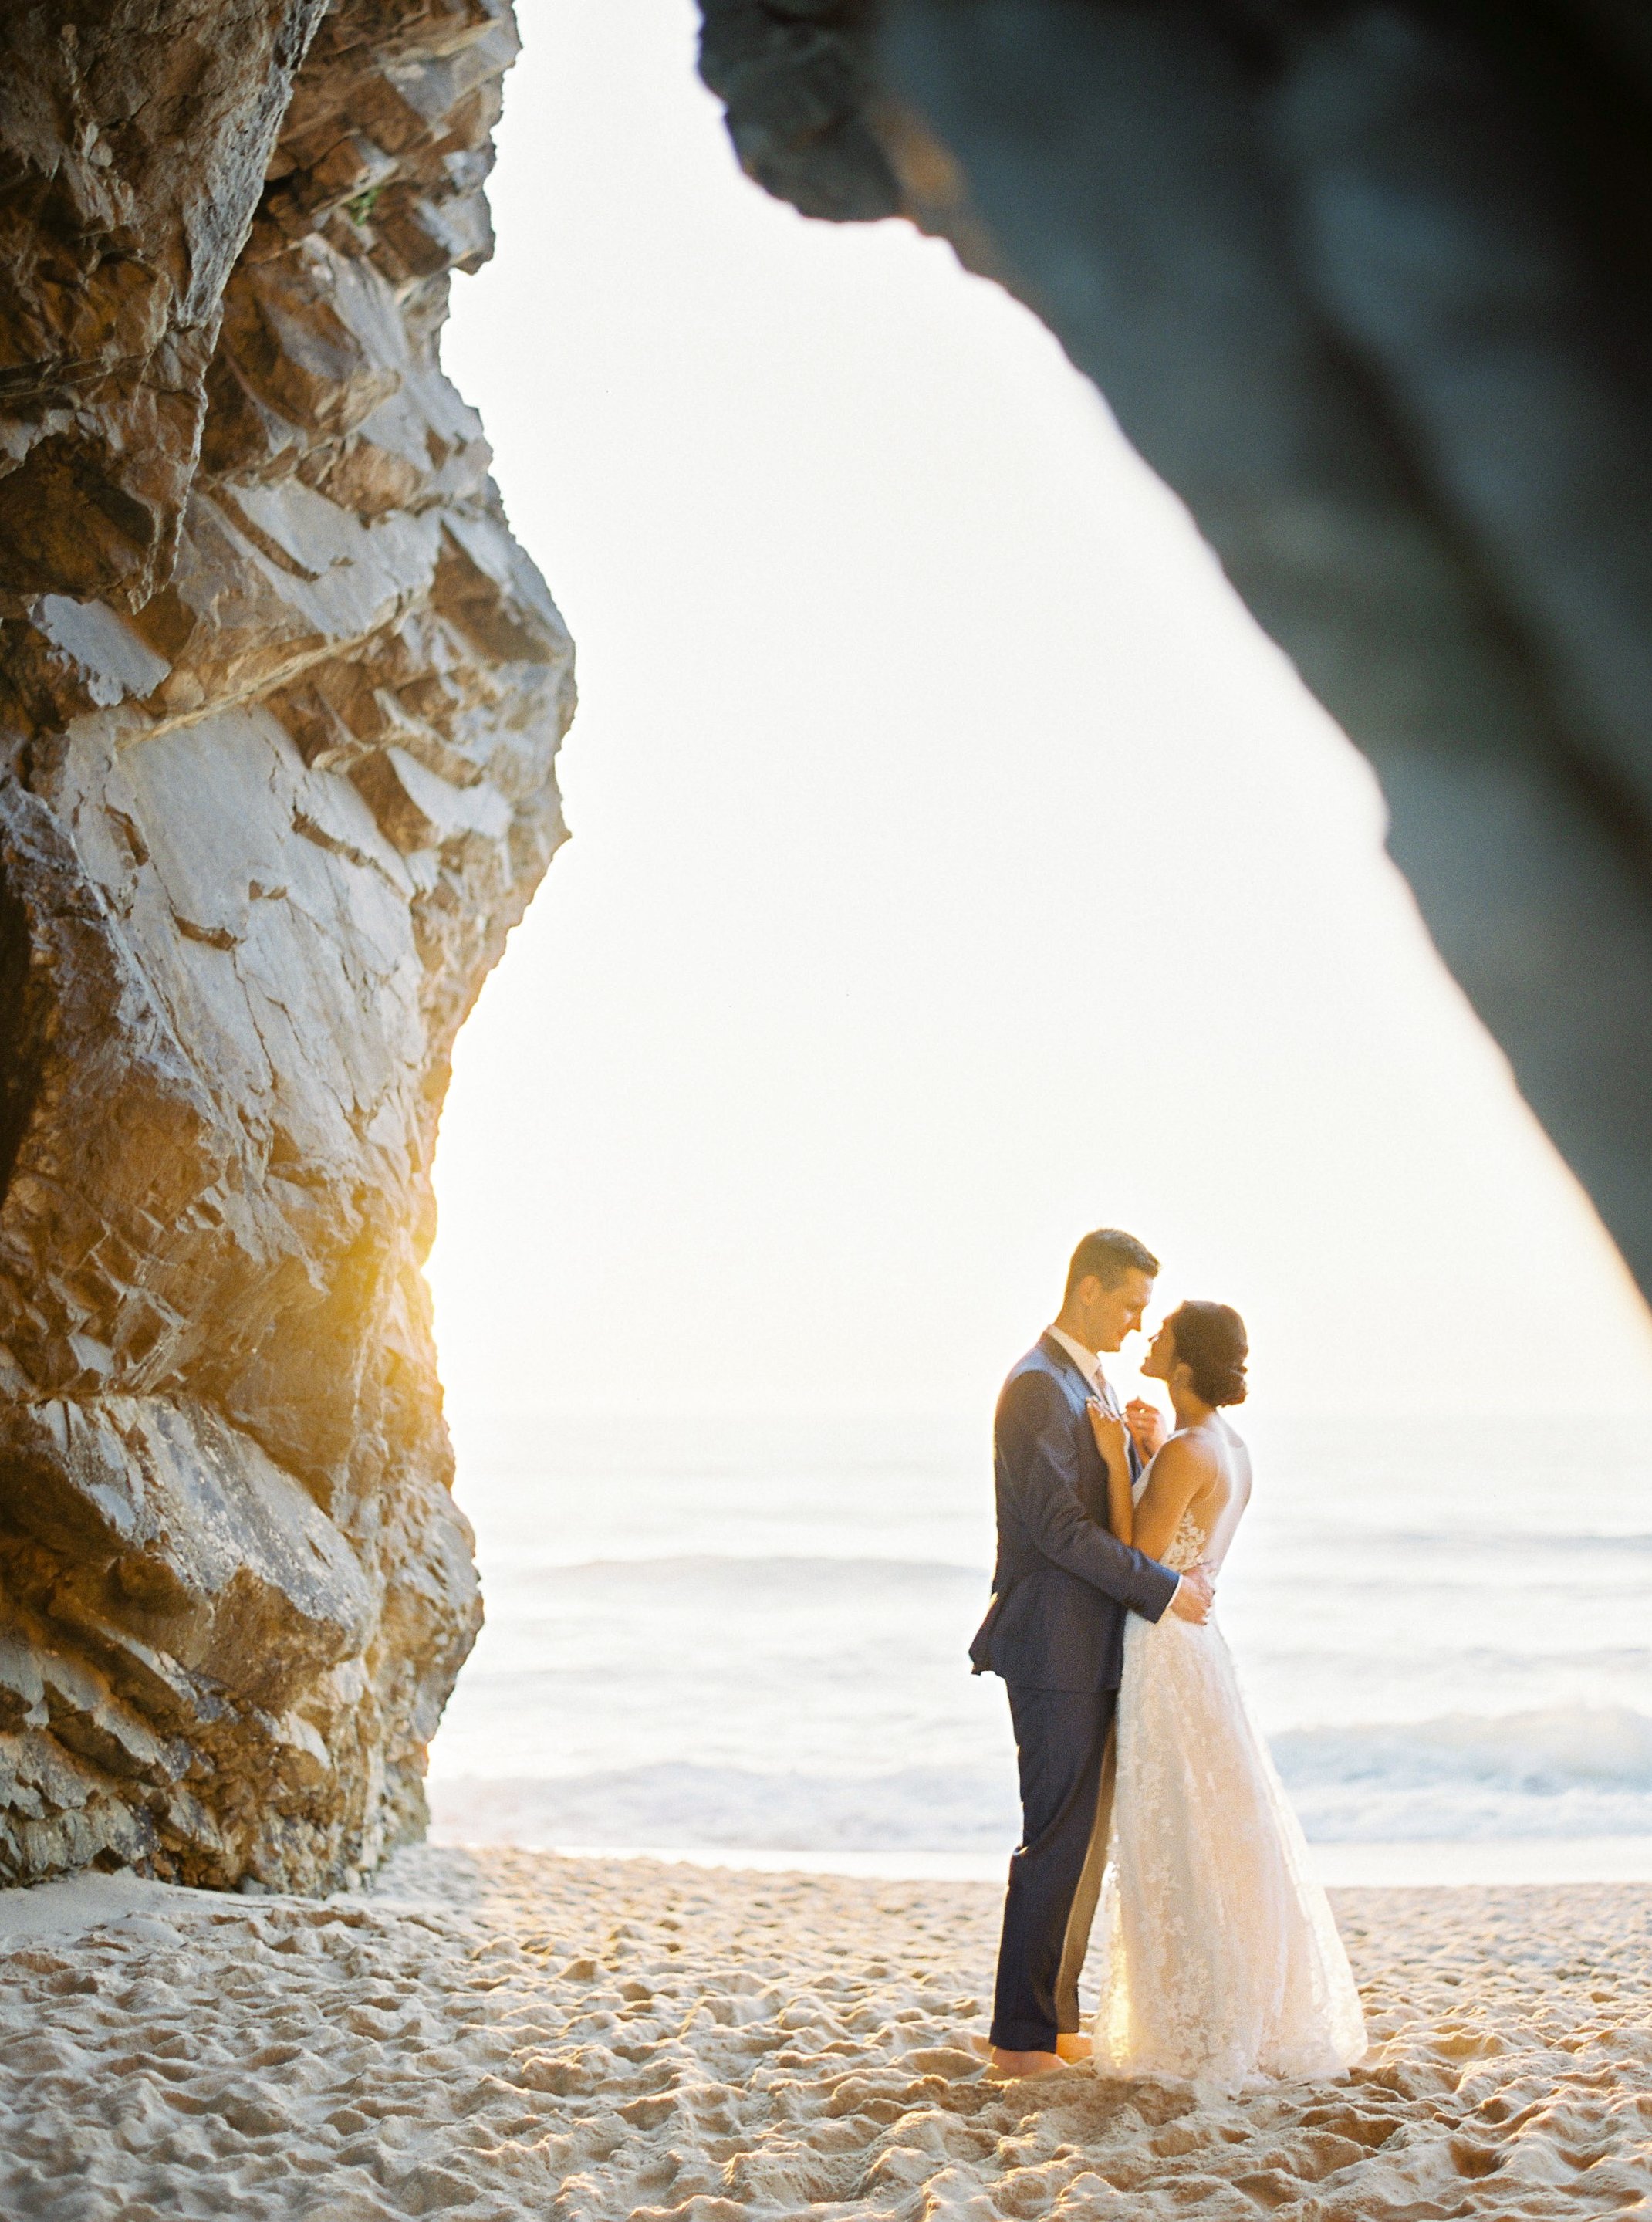 Bride and groom standing under the arche formed by a cliff right next to the ocean, while the light of the setting sun comes through